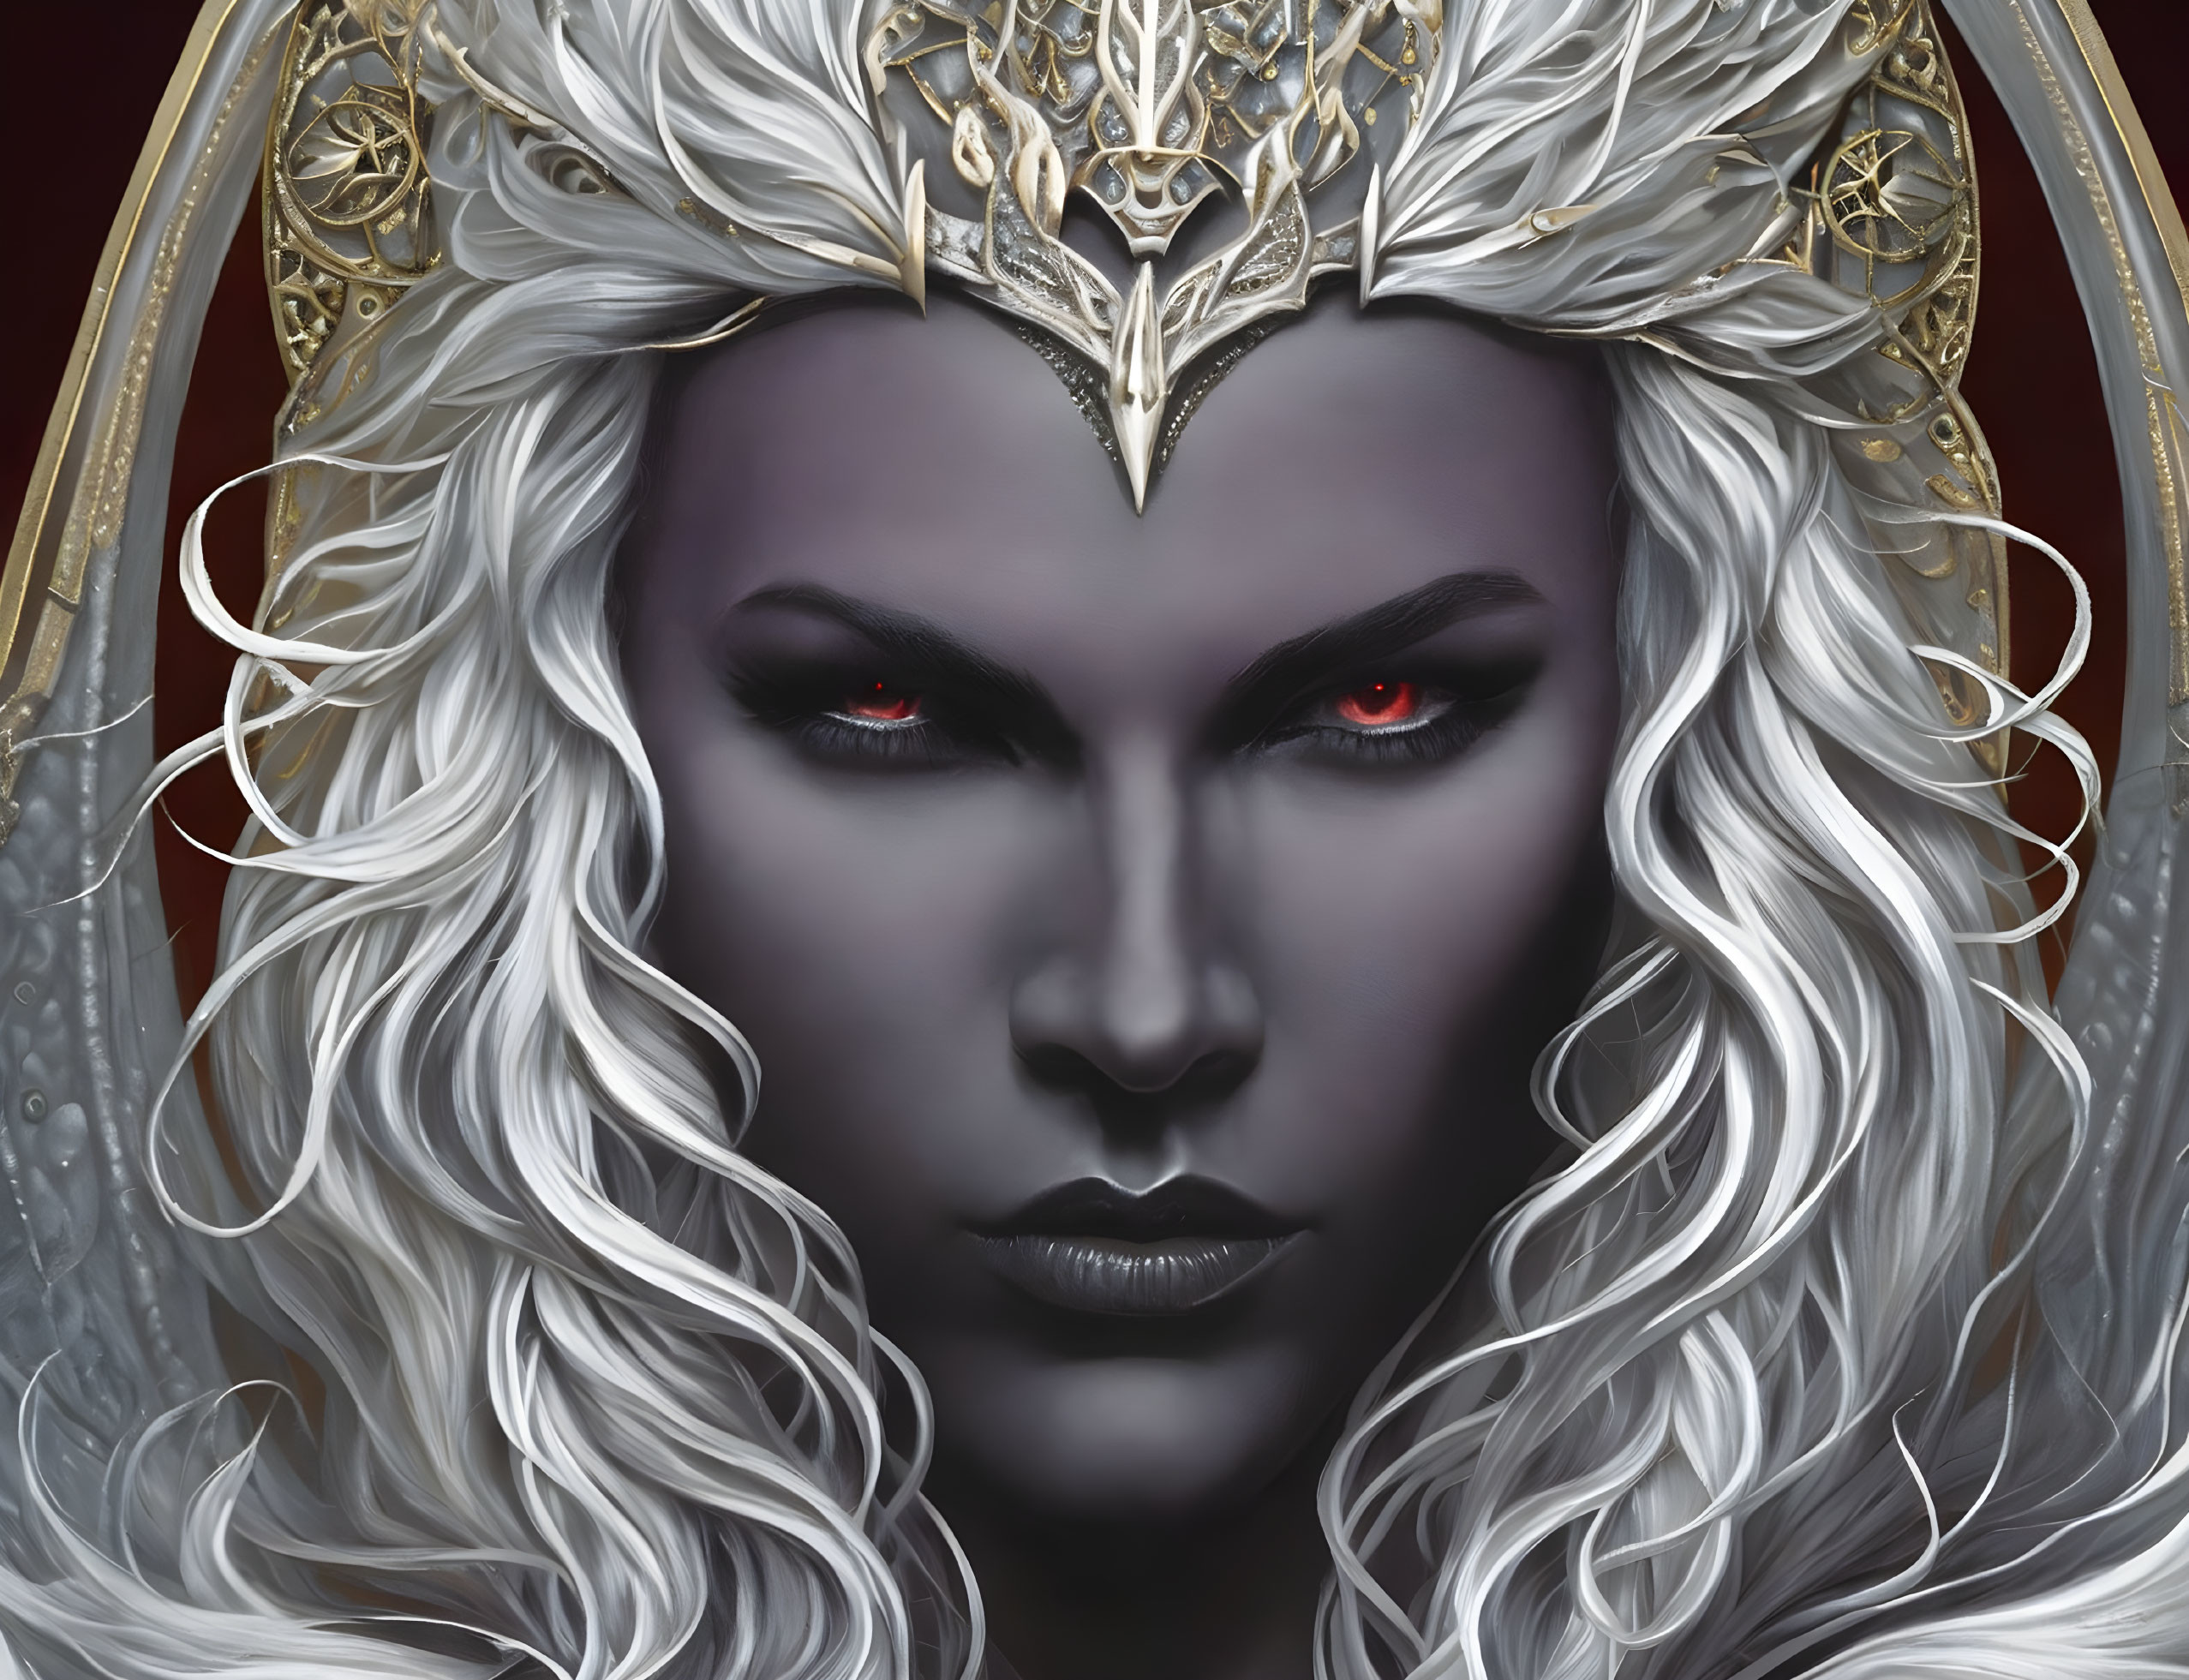 Intense female portrait with pale skin, red eyes, white hair, and golden crown